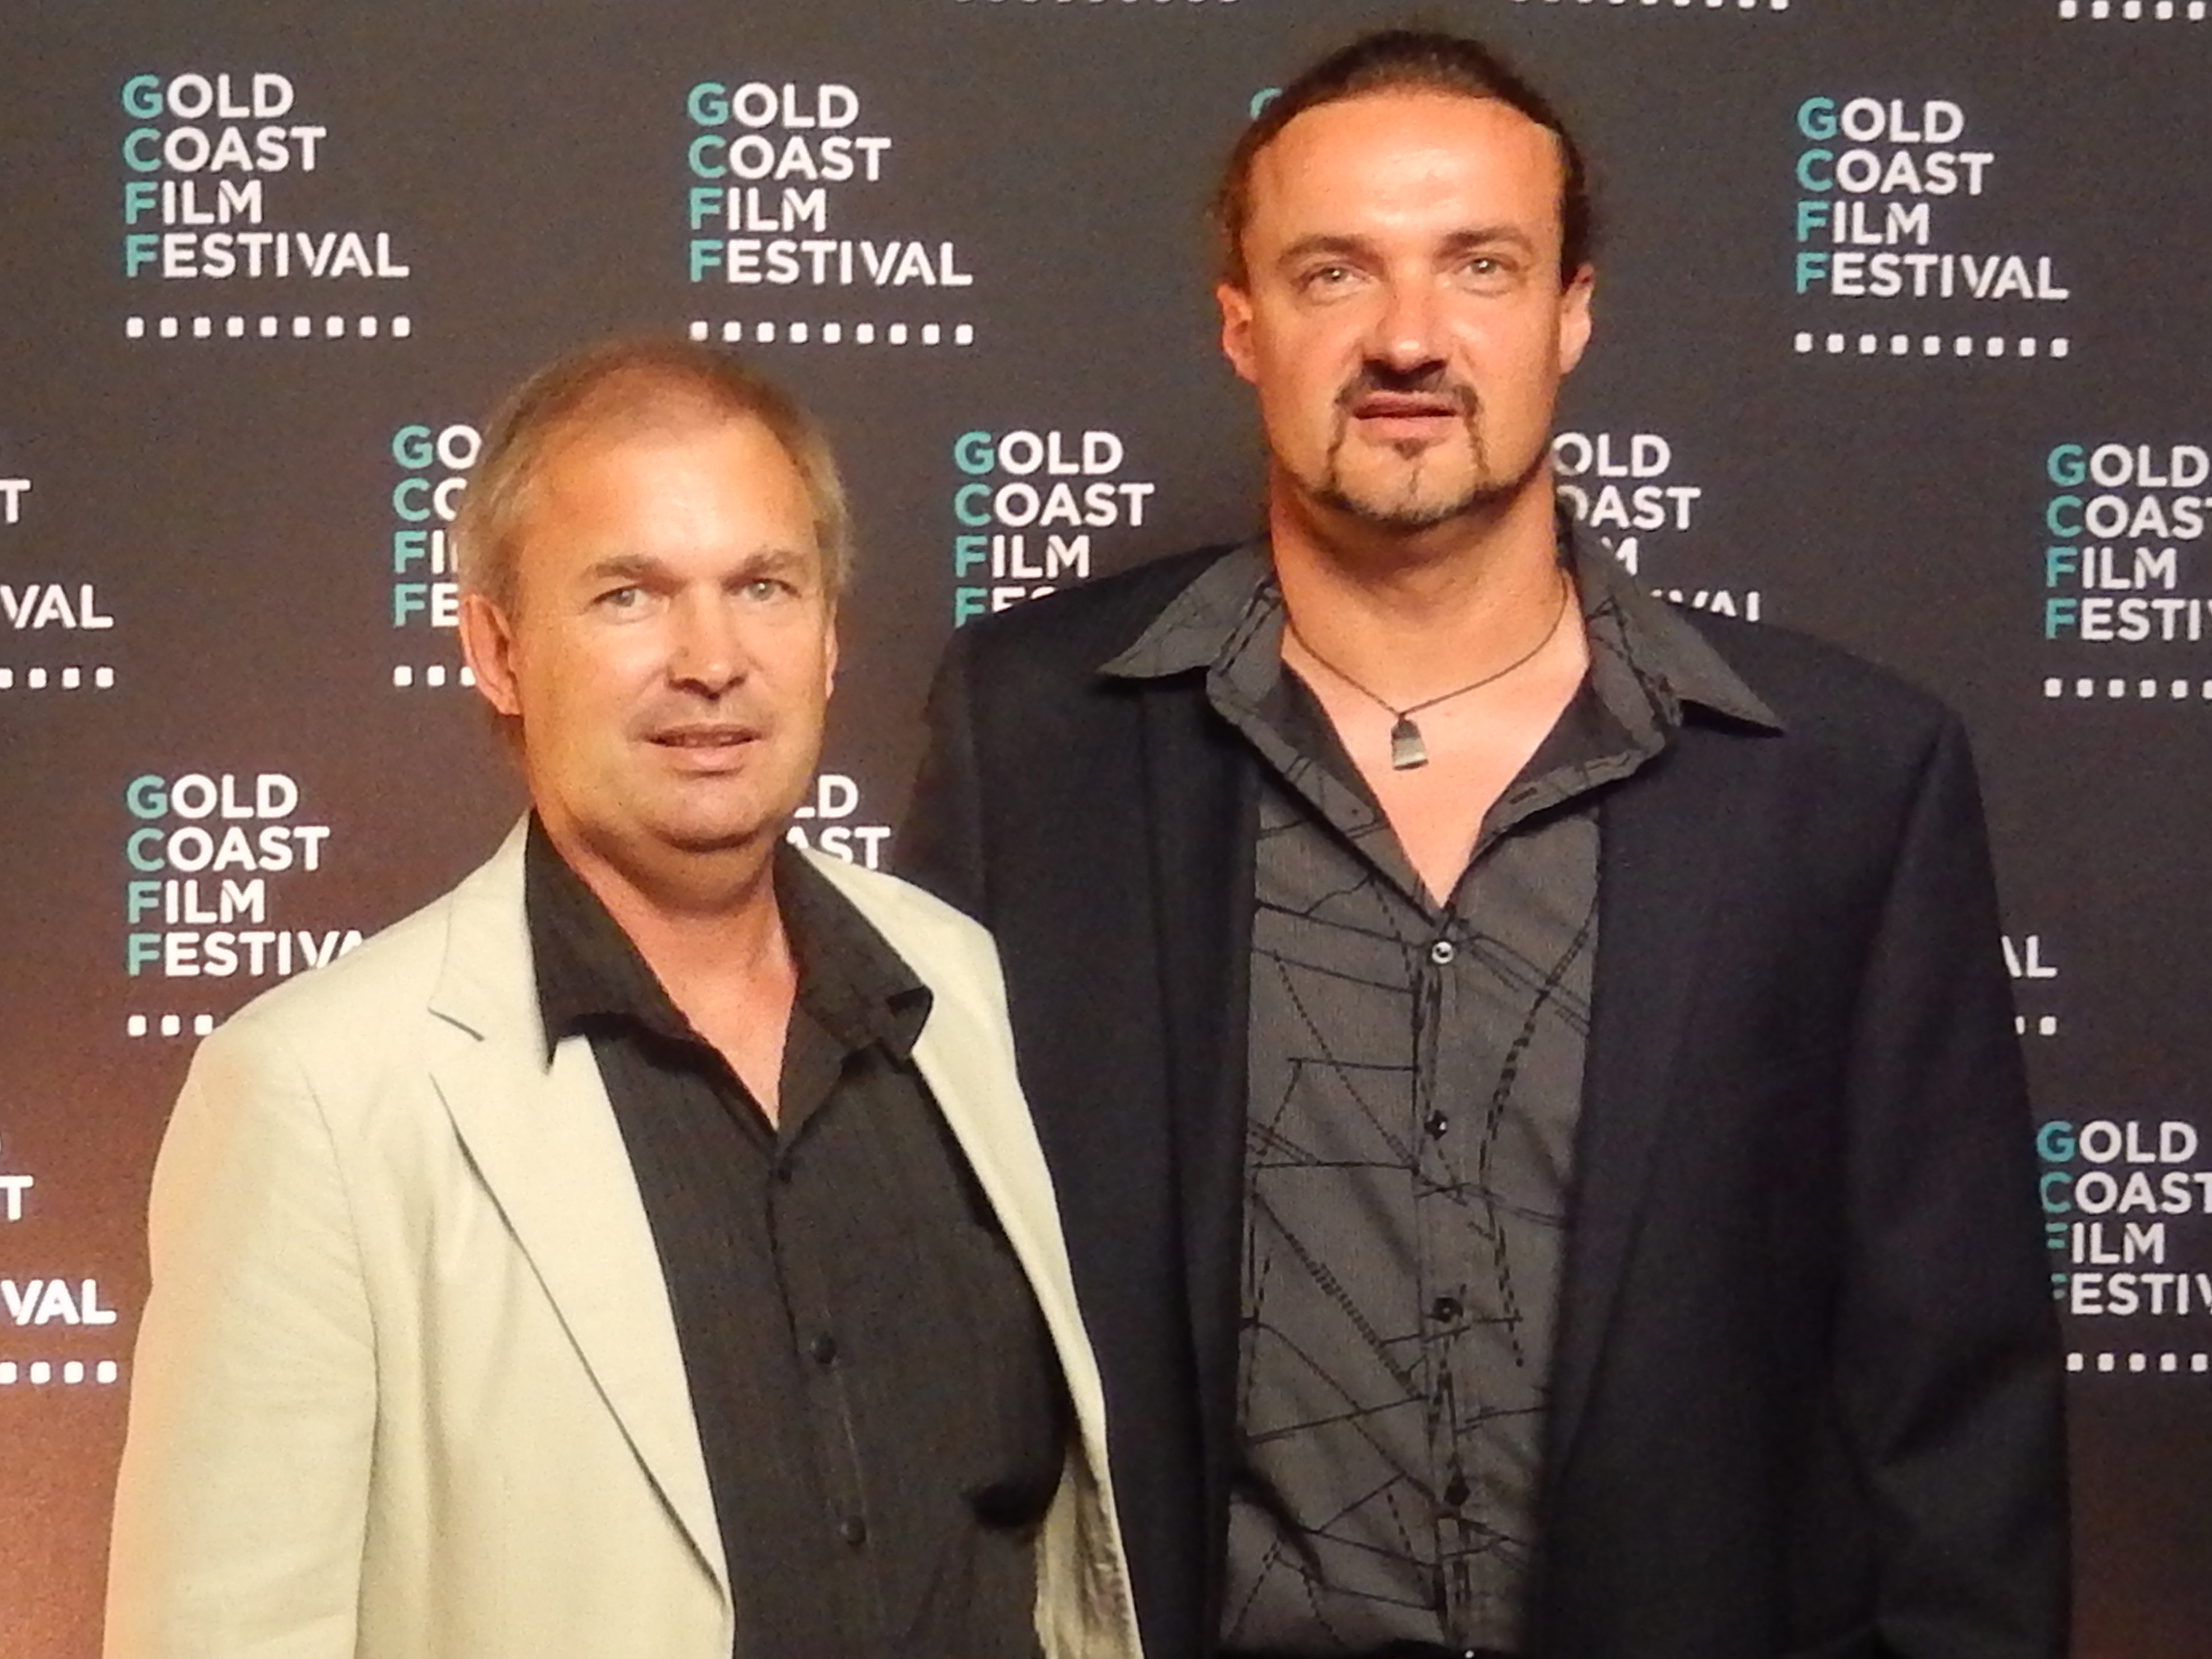 Michael Maguire with David Gould at the Australian premiere of 